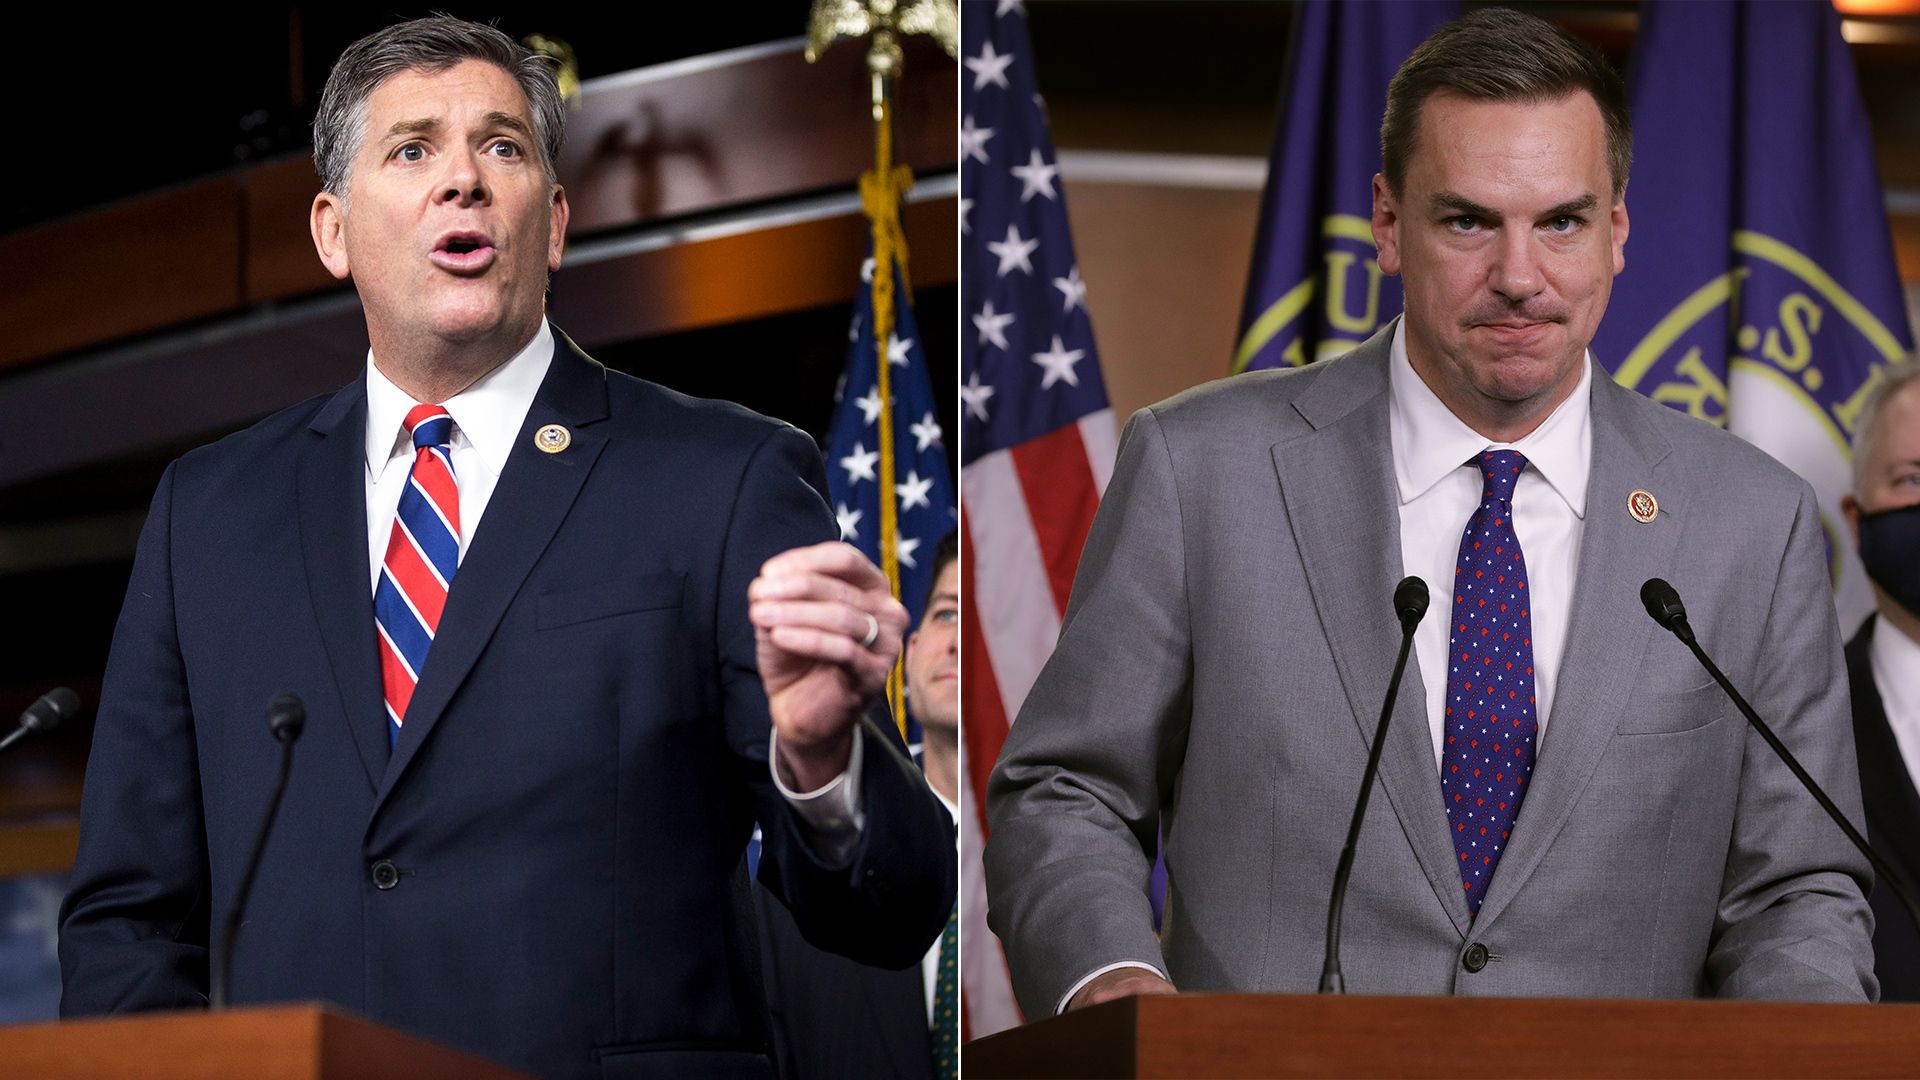 Reps. Darin LaHood and Richard Hudson are seen side-by-side in a photo array.